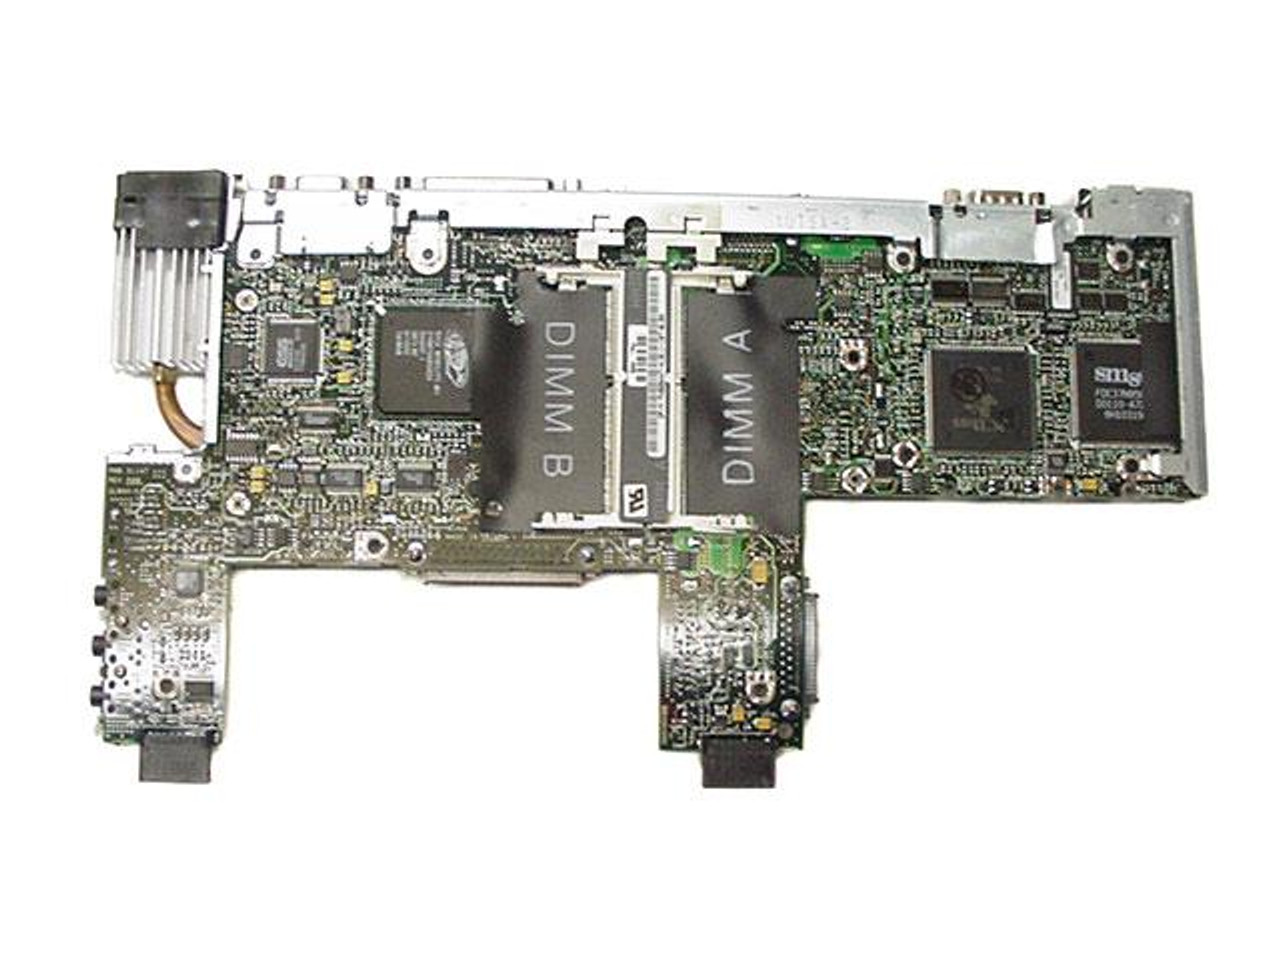 02844T Dell System Board (Motherboard) for Inspiron 3700, Latitude CPX, CPT (Refurbished)